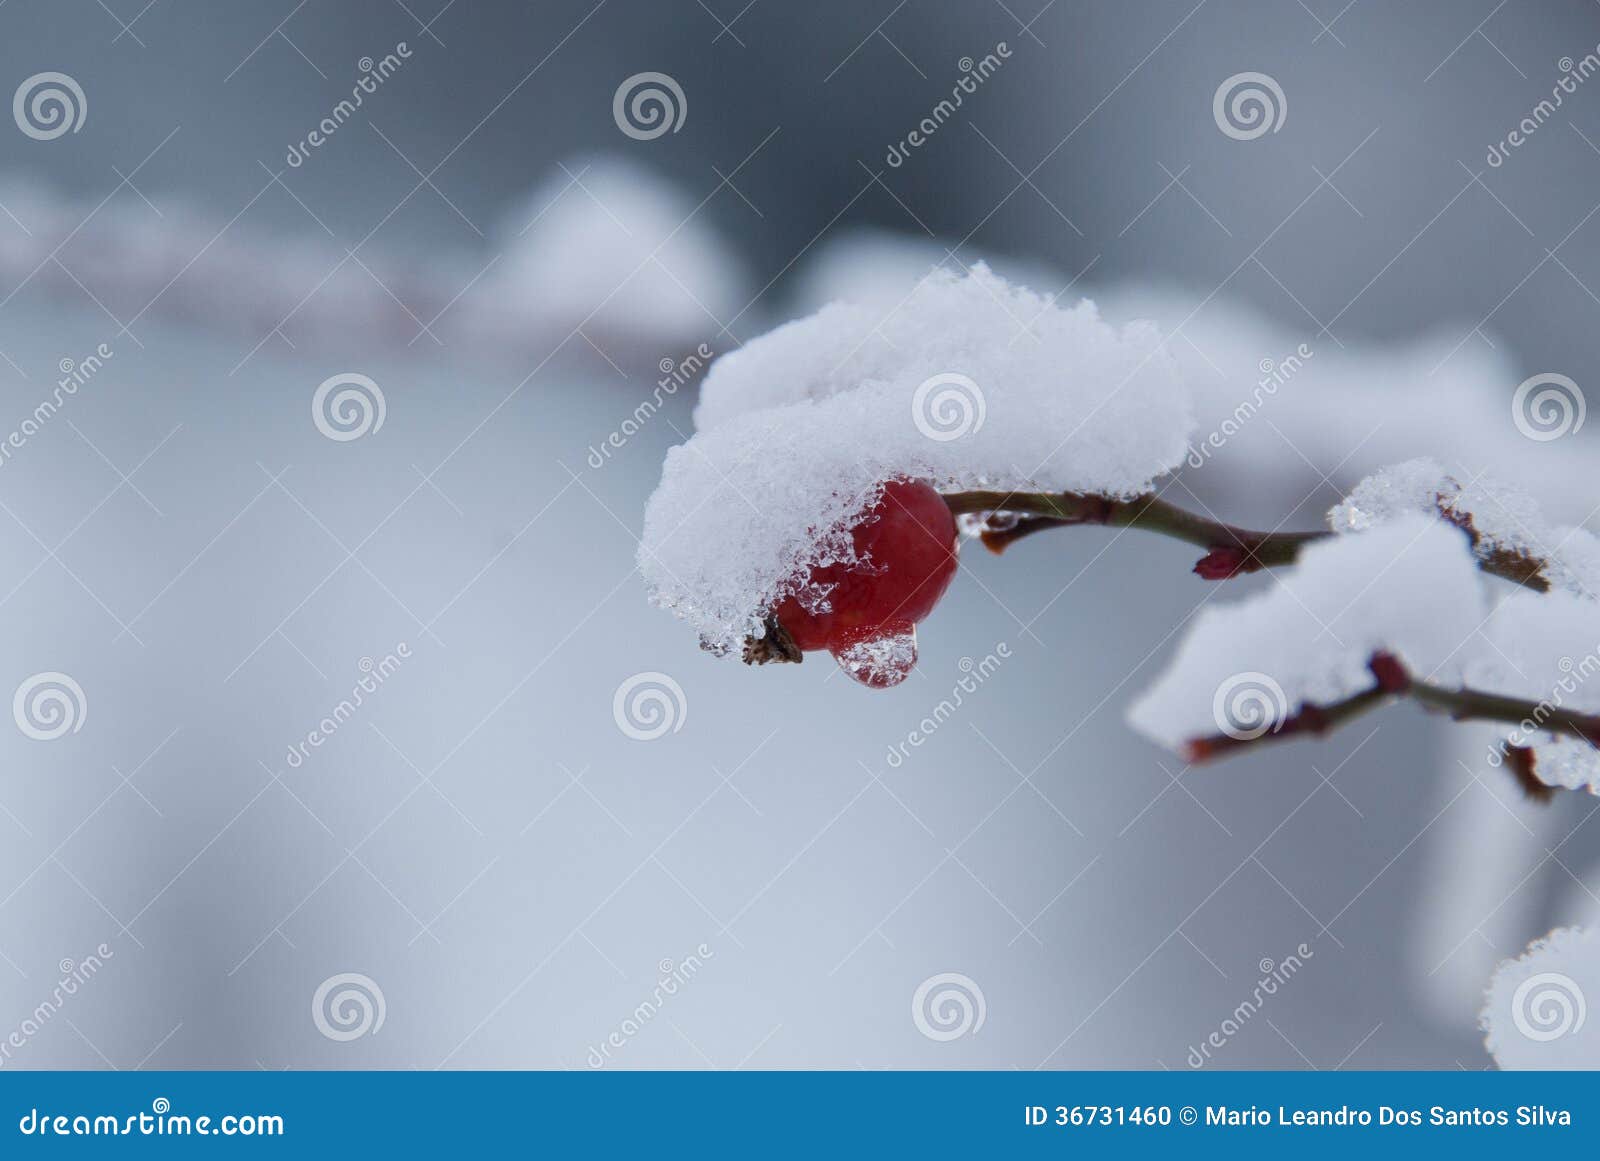 Rose hip covered by snow. This it a red fruit which resists the rigors of winter waiting the arrival of spring. It is so beautiful to see the contrast between the white snow and red fruit.